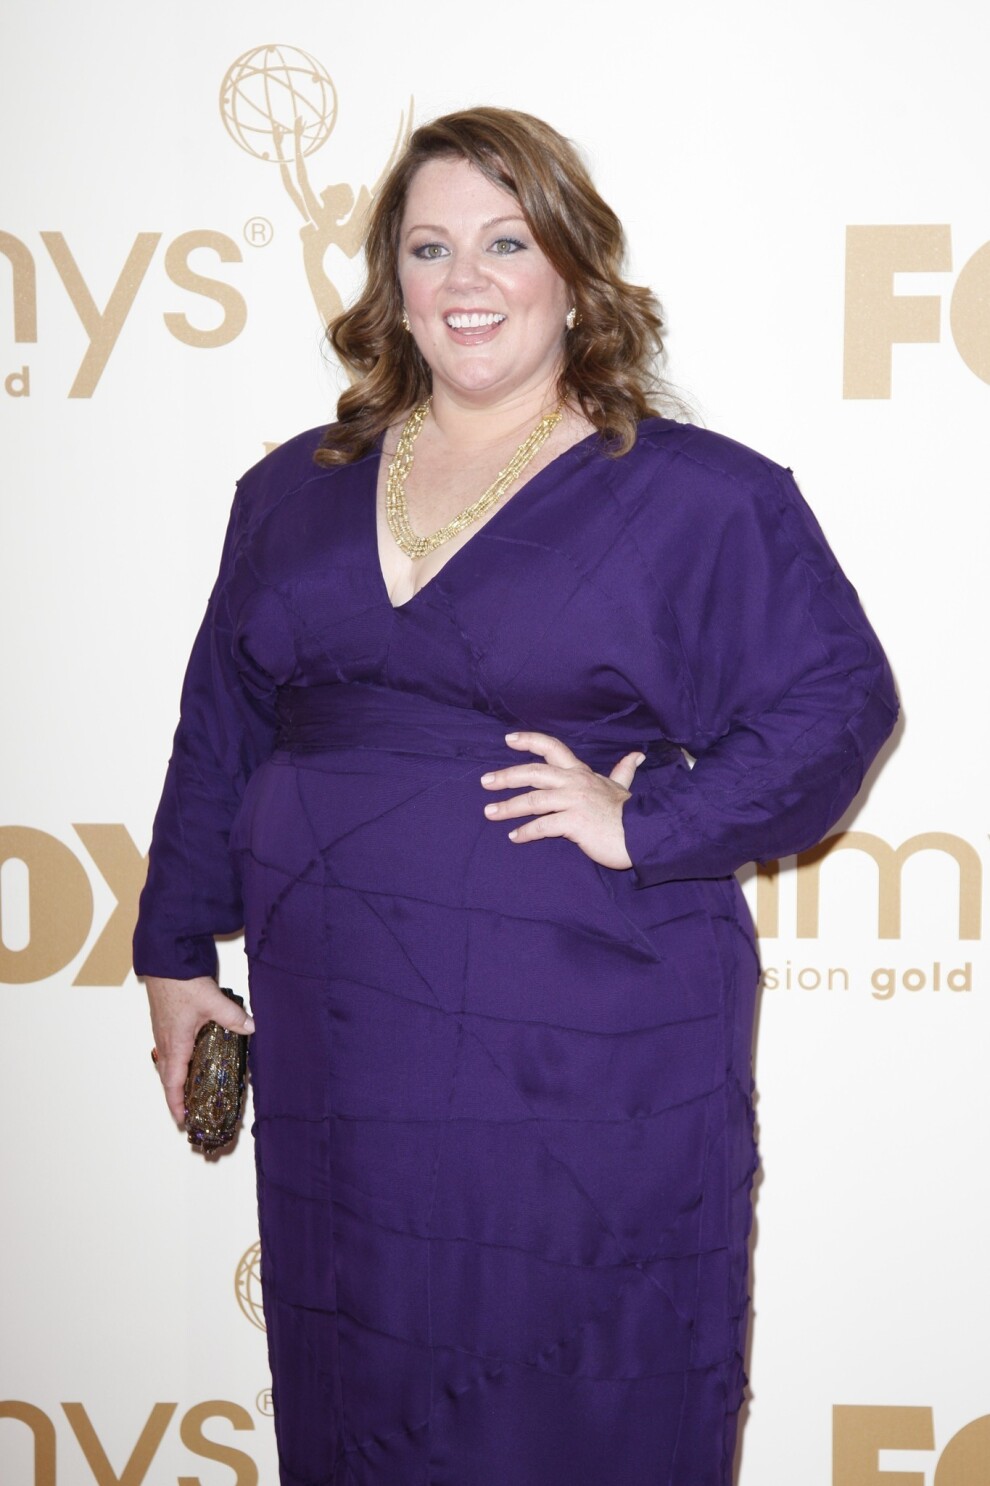 Melissa McCarthy 'disappointed' shopping, talks clothing line - Los Angeles Times